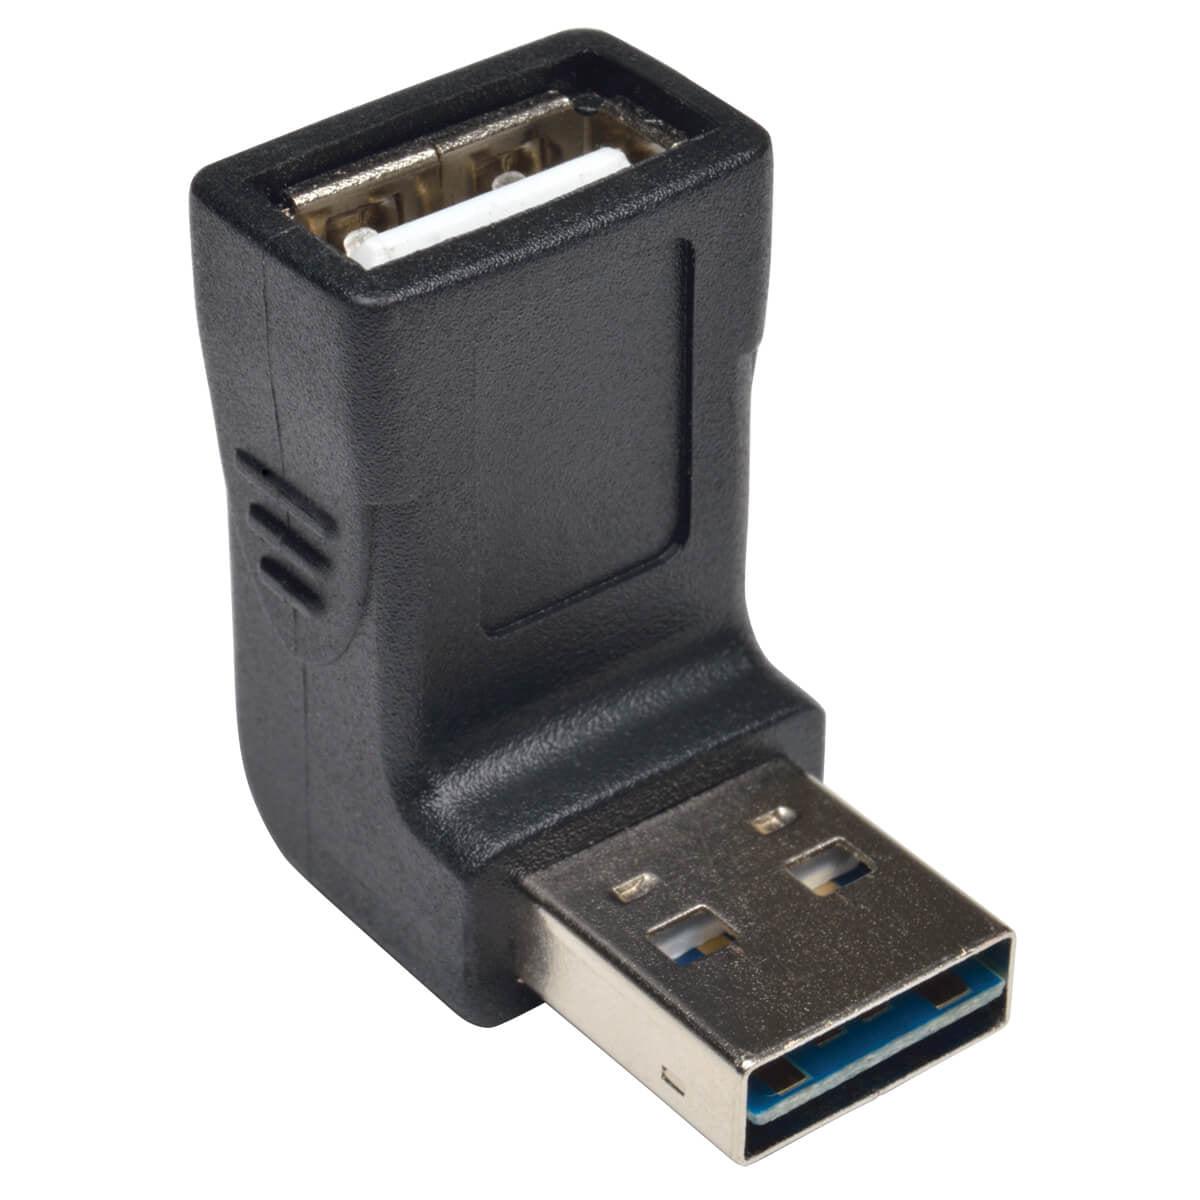 Tripp Lite Ur024-000-Up Universal Reversible Usb 2.0 Adapter (Reversible A To Up Angle A M/F)